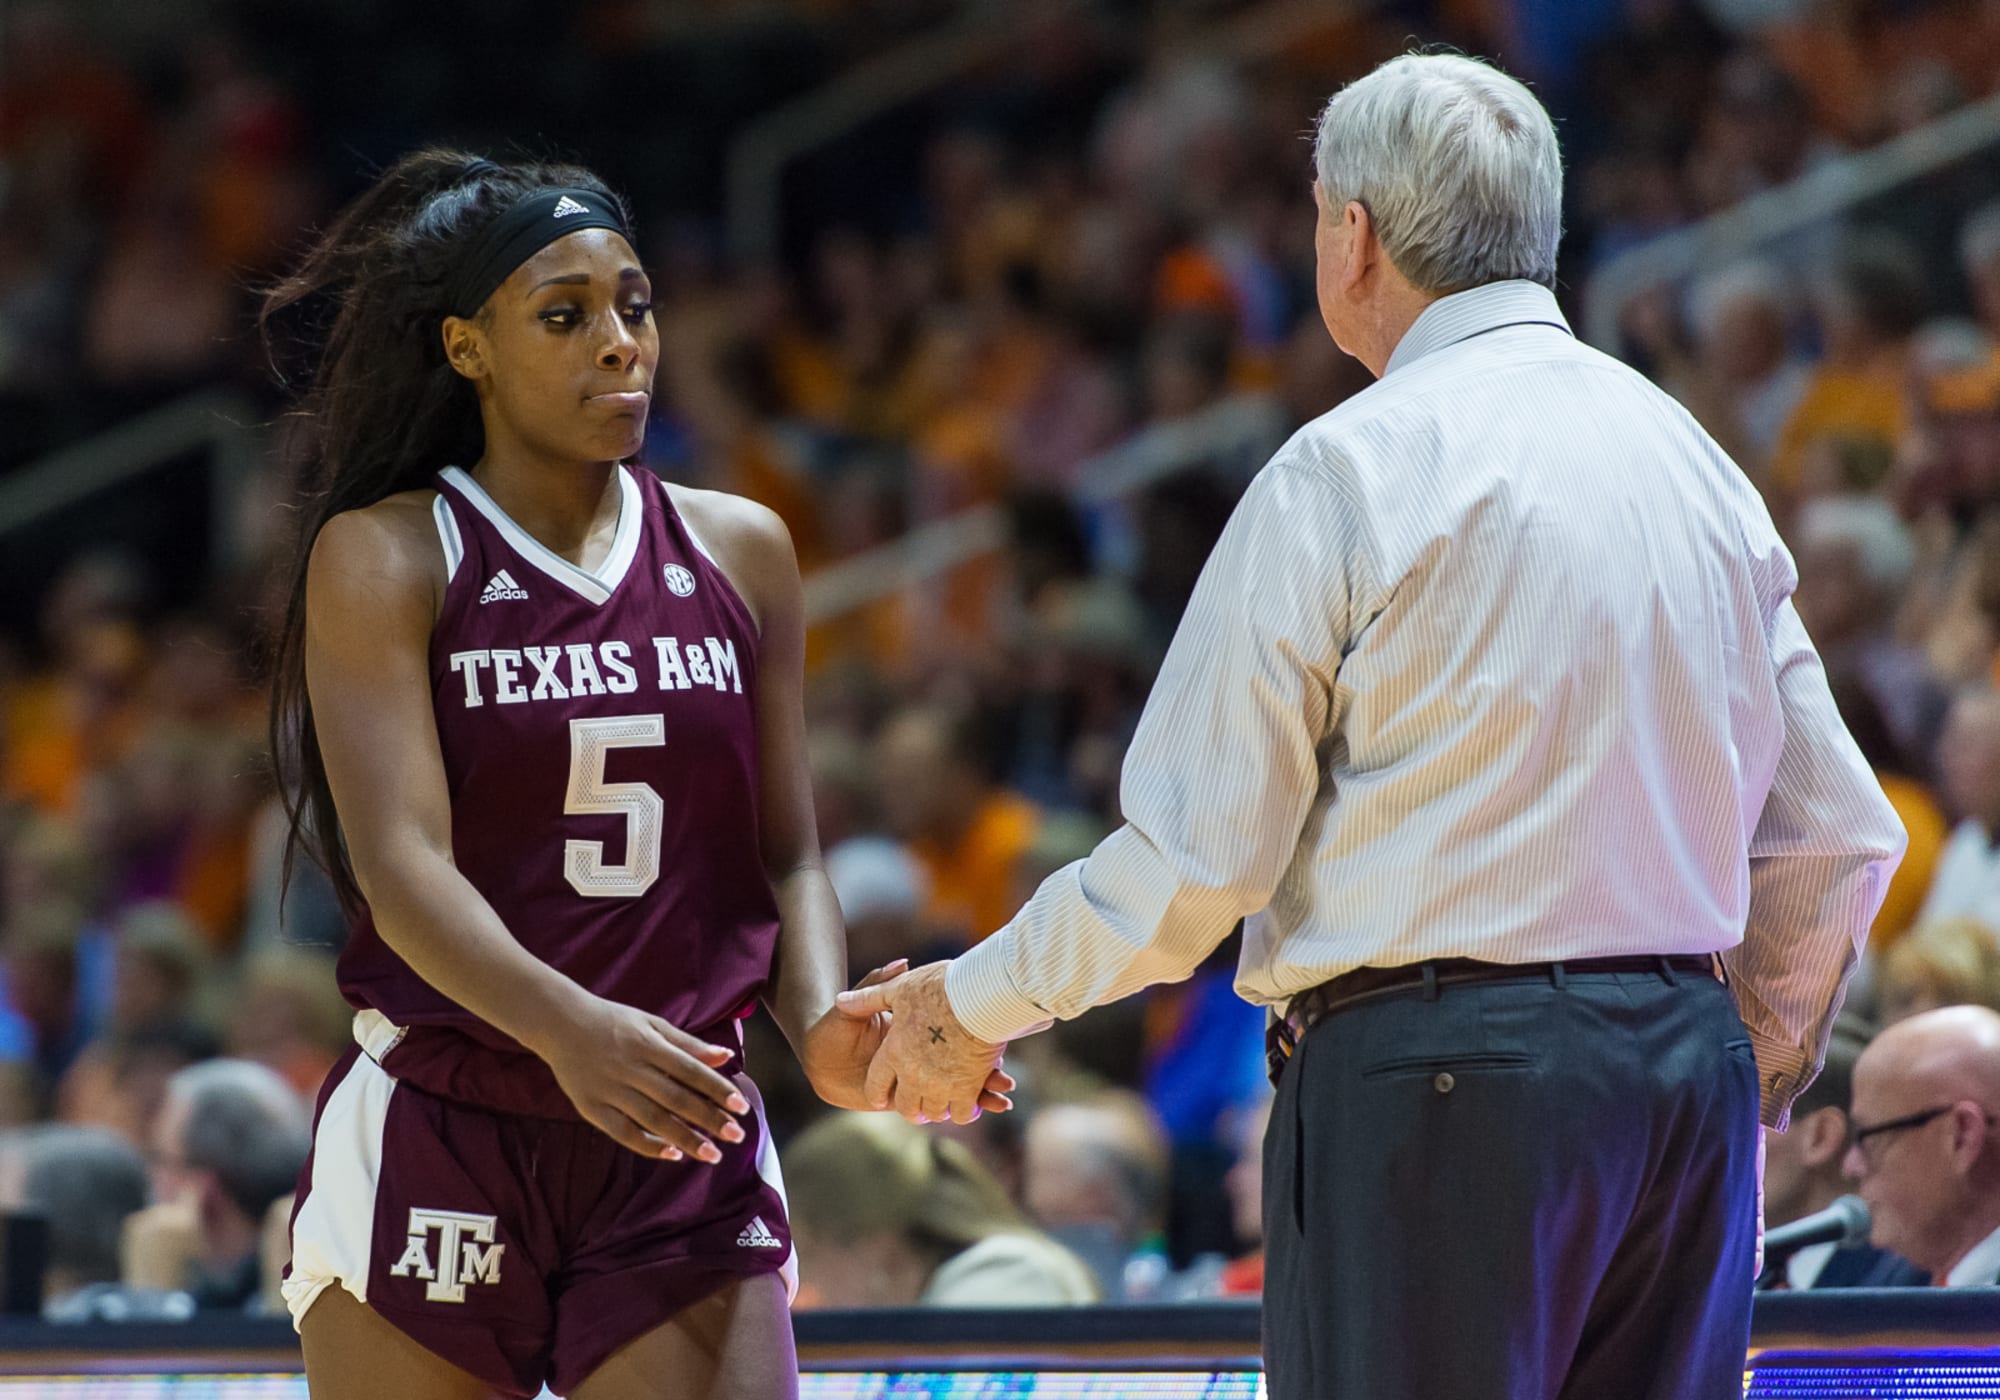 Anriel Howard transfers from Texas A&M to Mississippi State